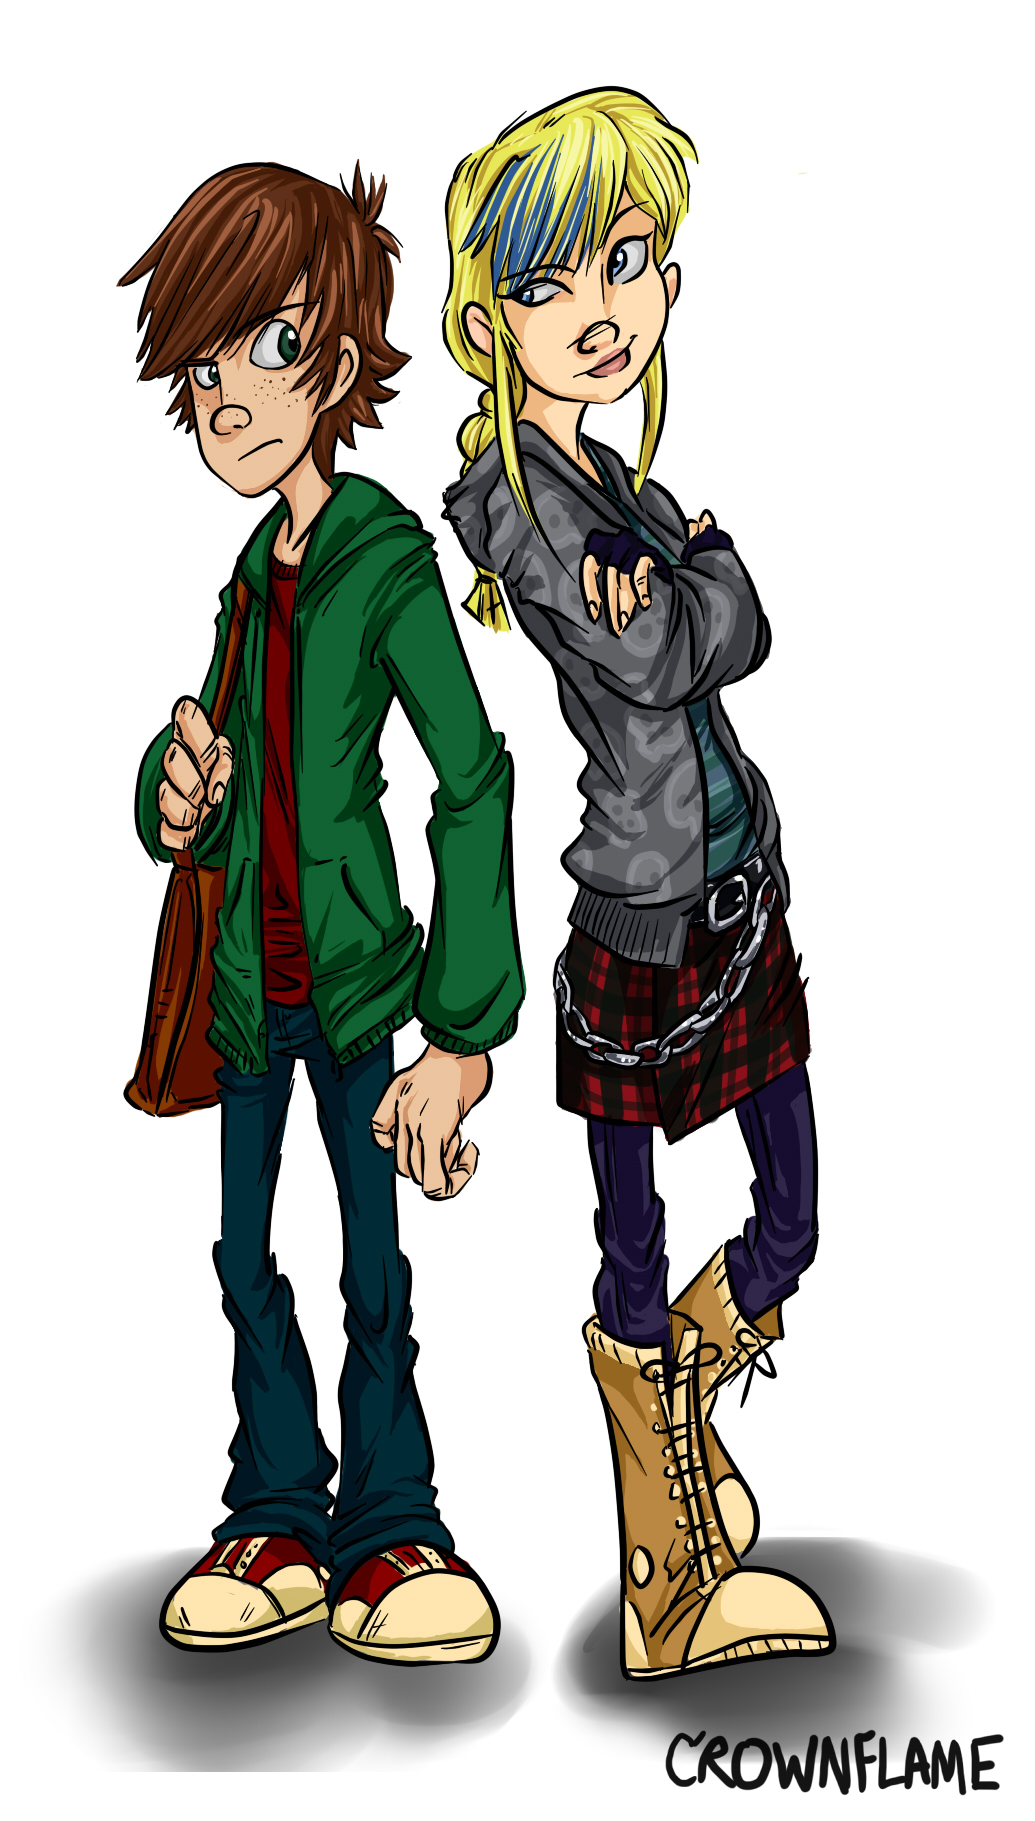 HIccup and Astrid 2.0- Concept by Cheesefritters